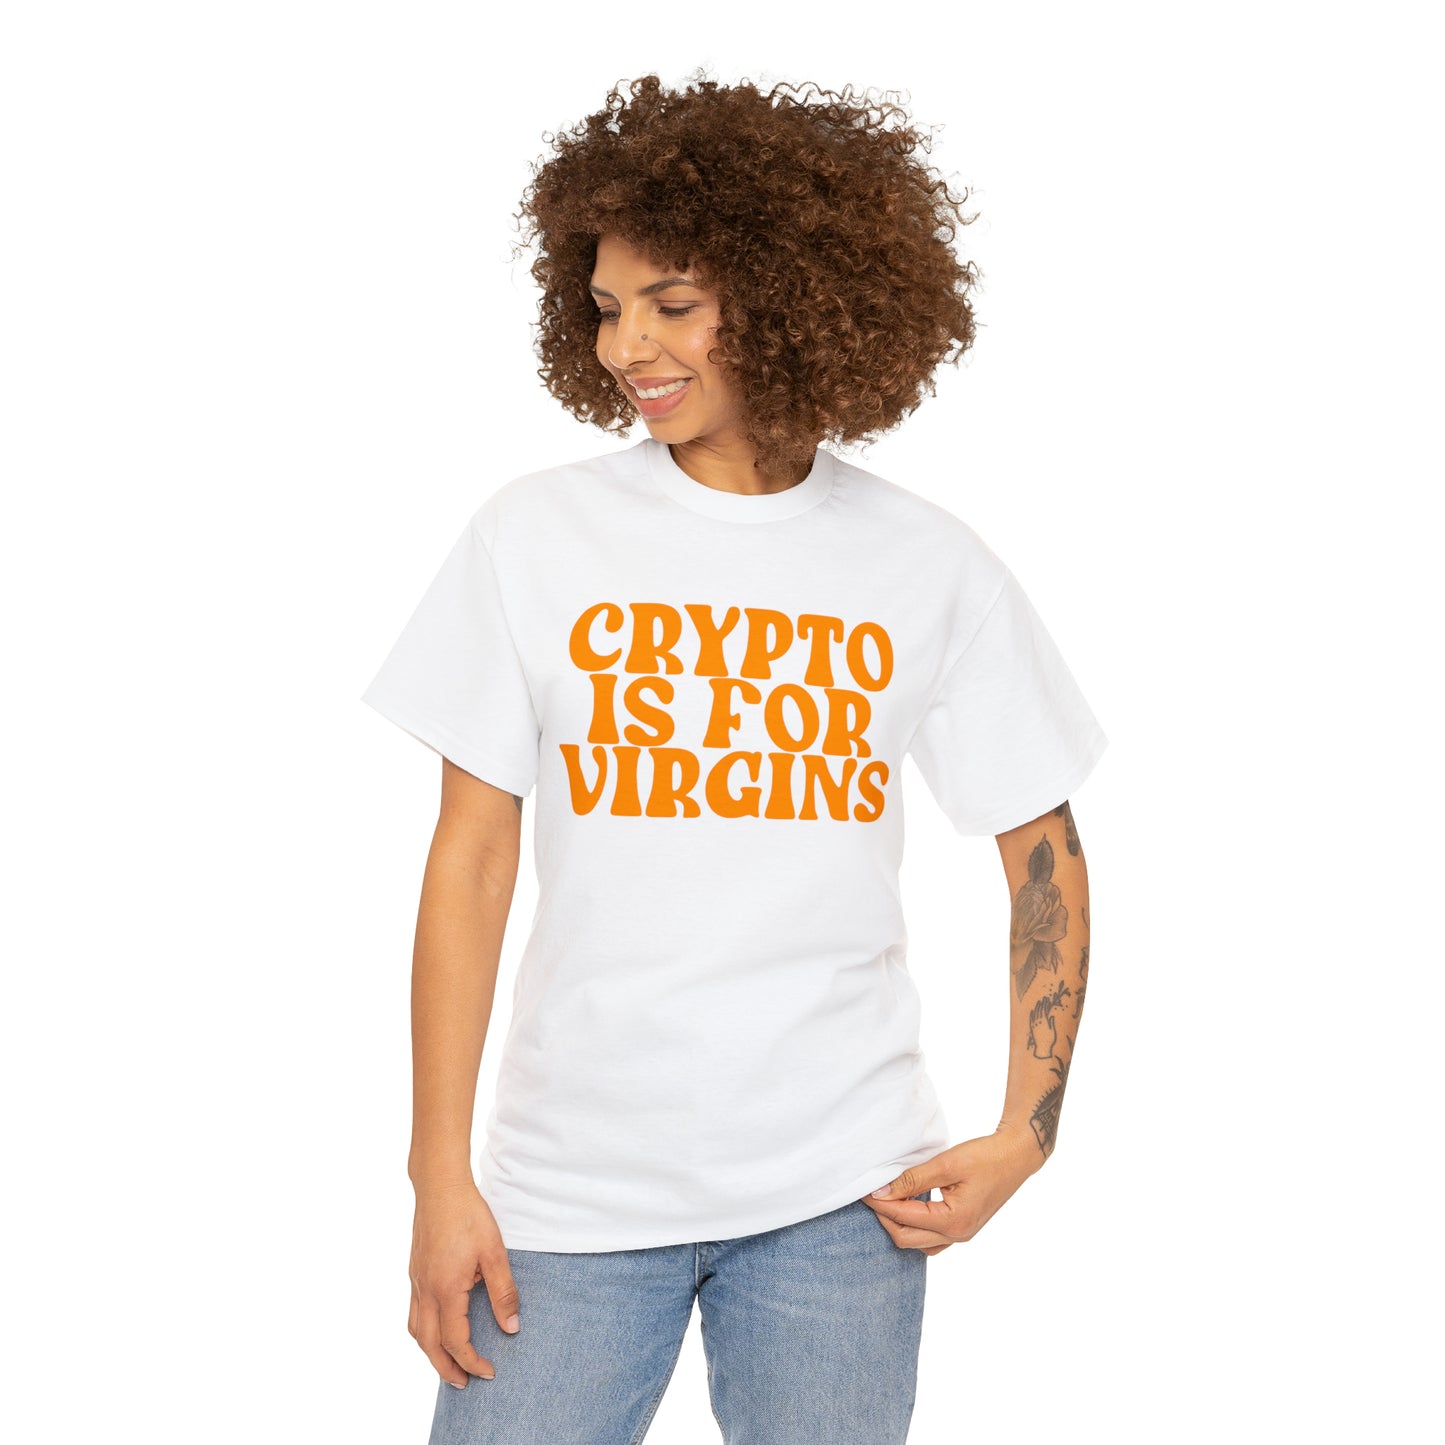 CRYPTO IS FOR VIRGINS T-SHIRT